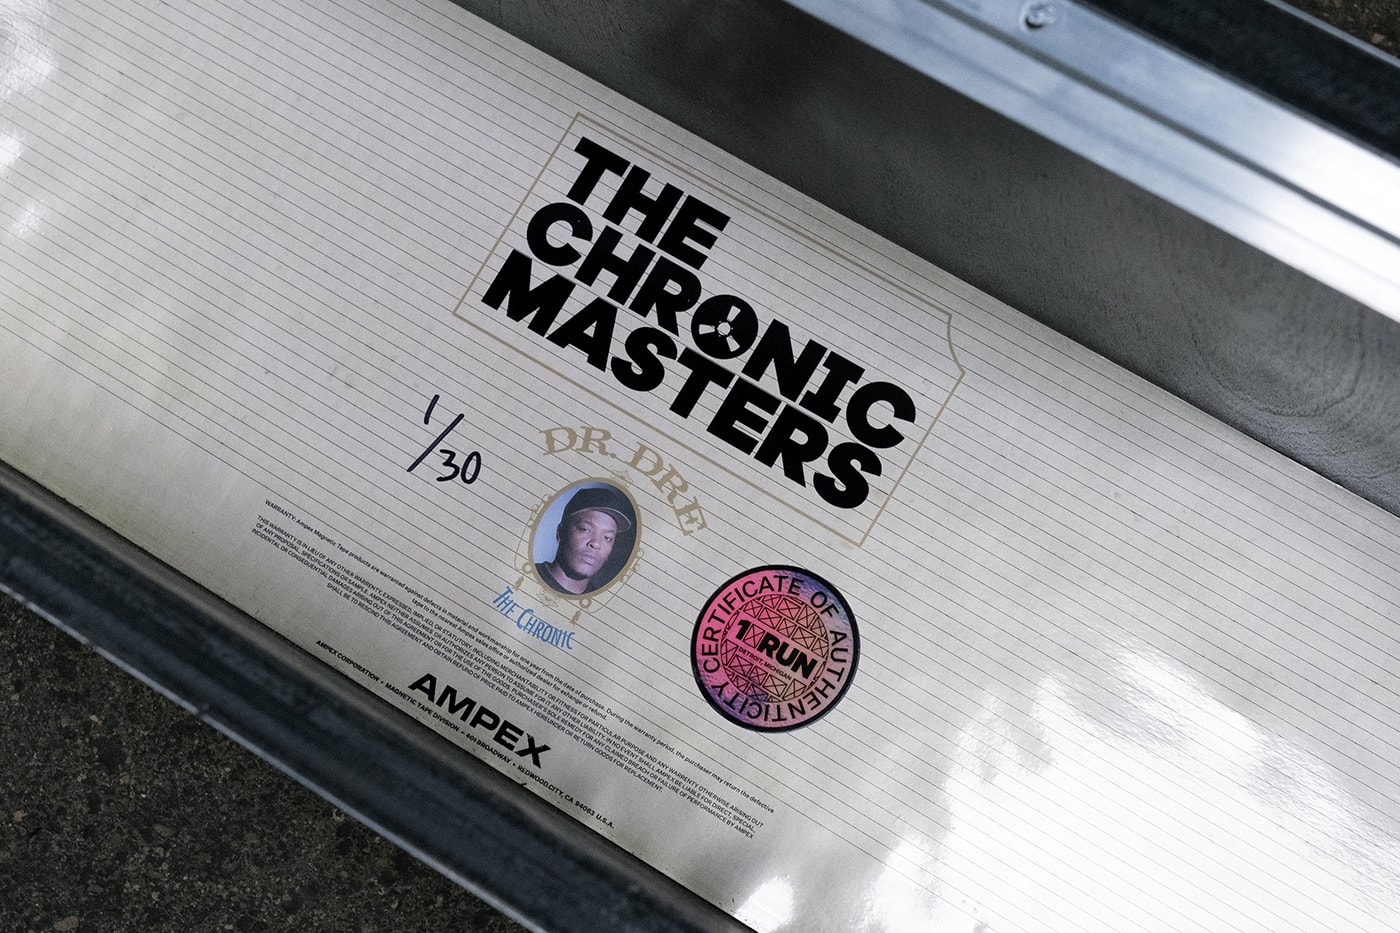 Dr Dre interscope records The Chronic Masters collectibles Drop 2 Release Info